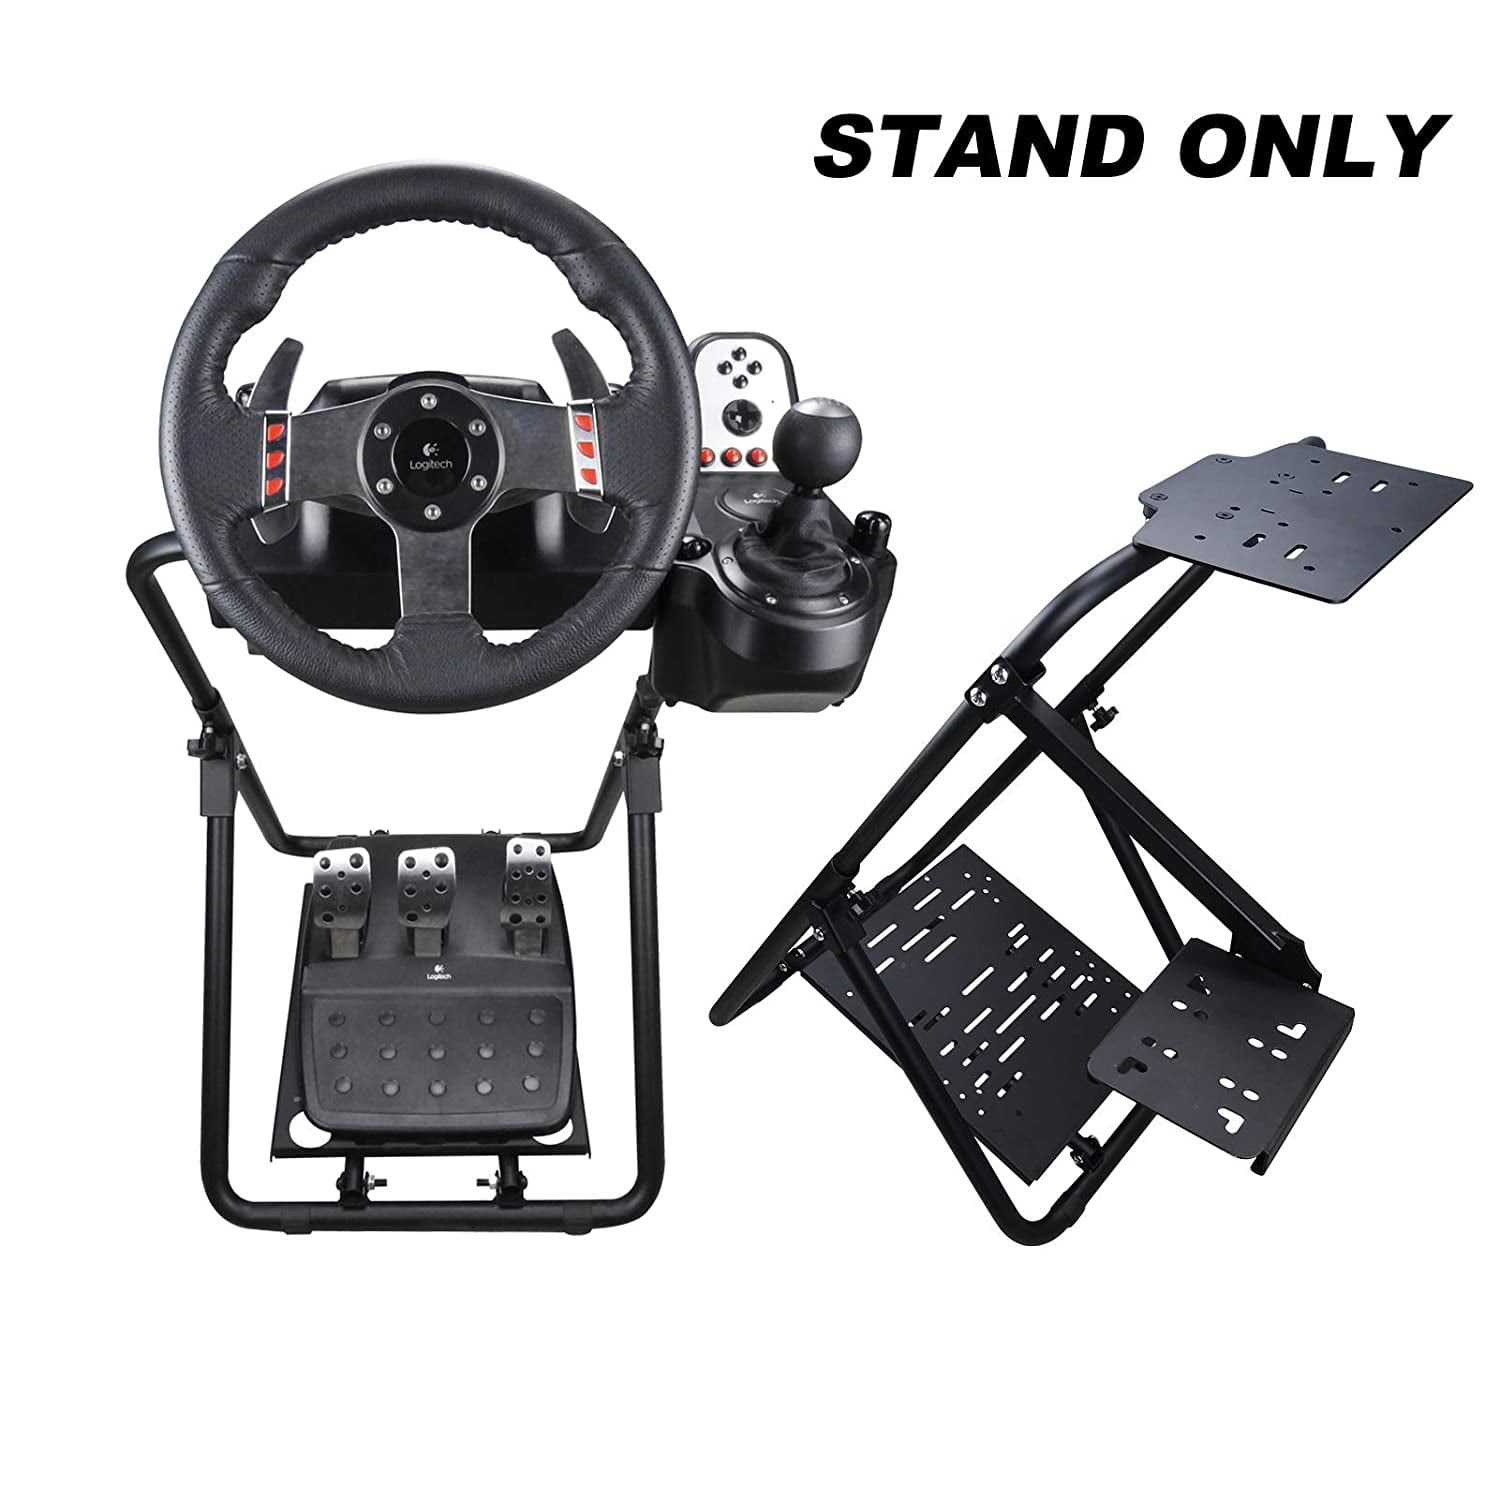 DWDZ Racing Wheel Stand Stand for Thrustmaster,Logitech G25,G27,G29,G920(Wheel&Pedals Not Included) - Walmart.com